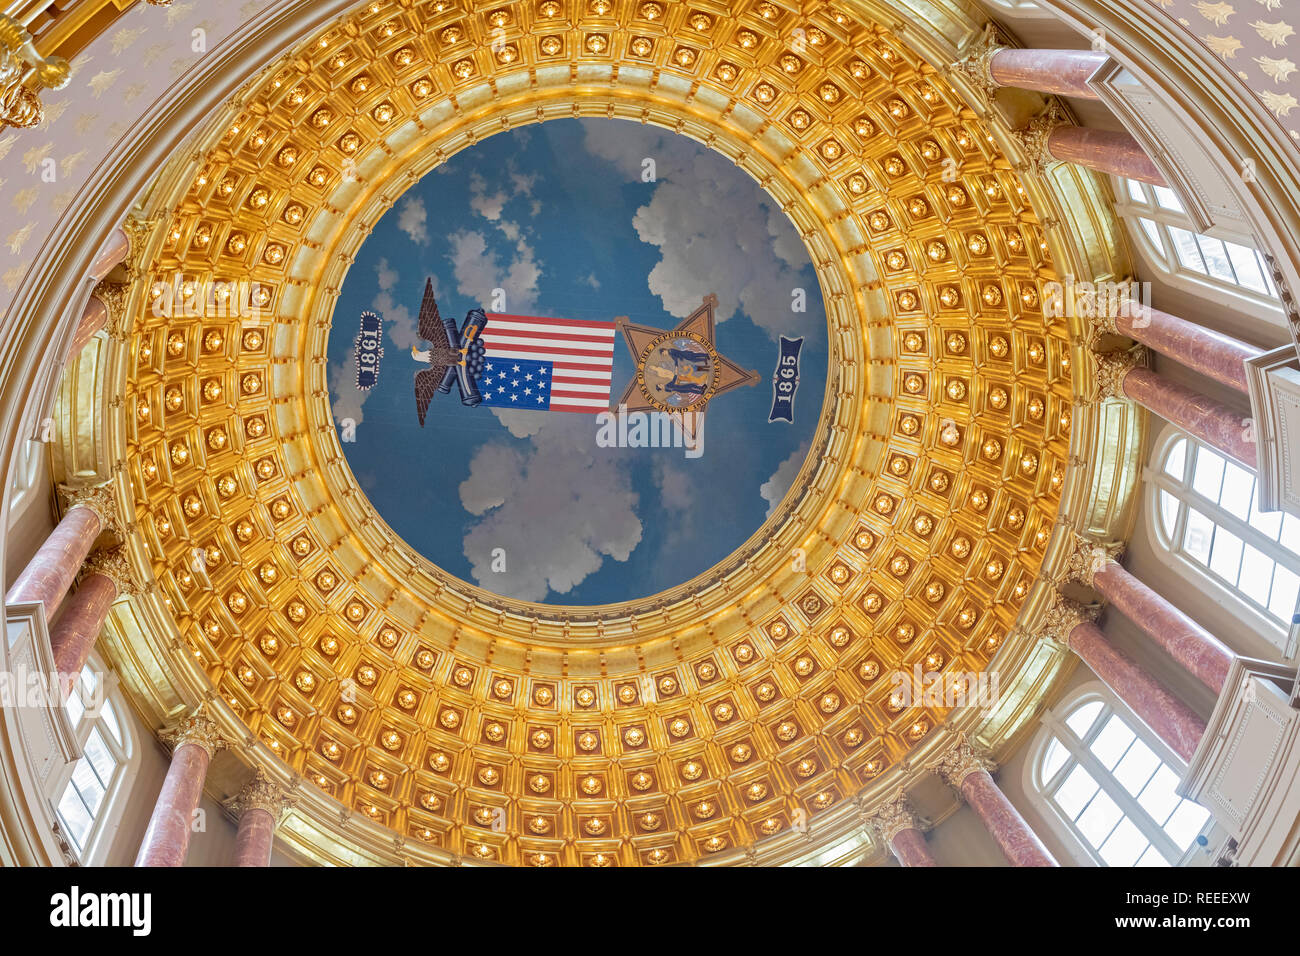 Des Moines, Iowa - The dome of the Iowa state capitol building. Stock Photo